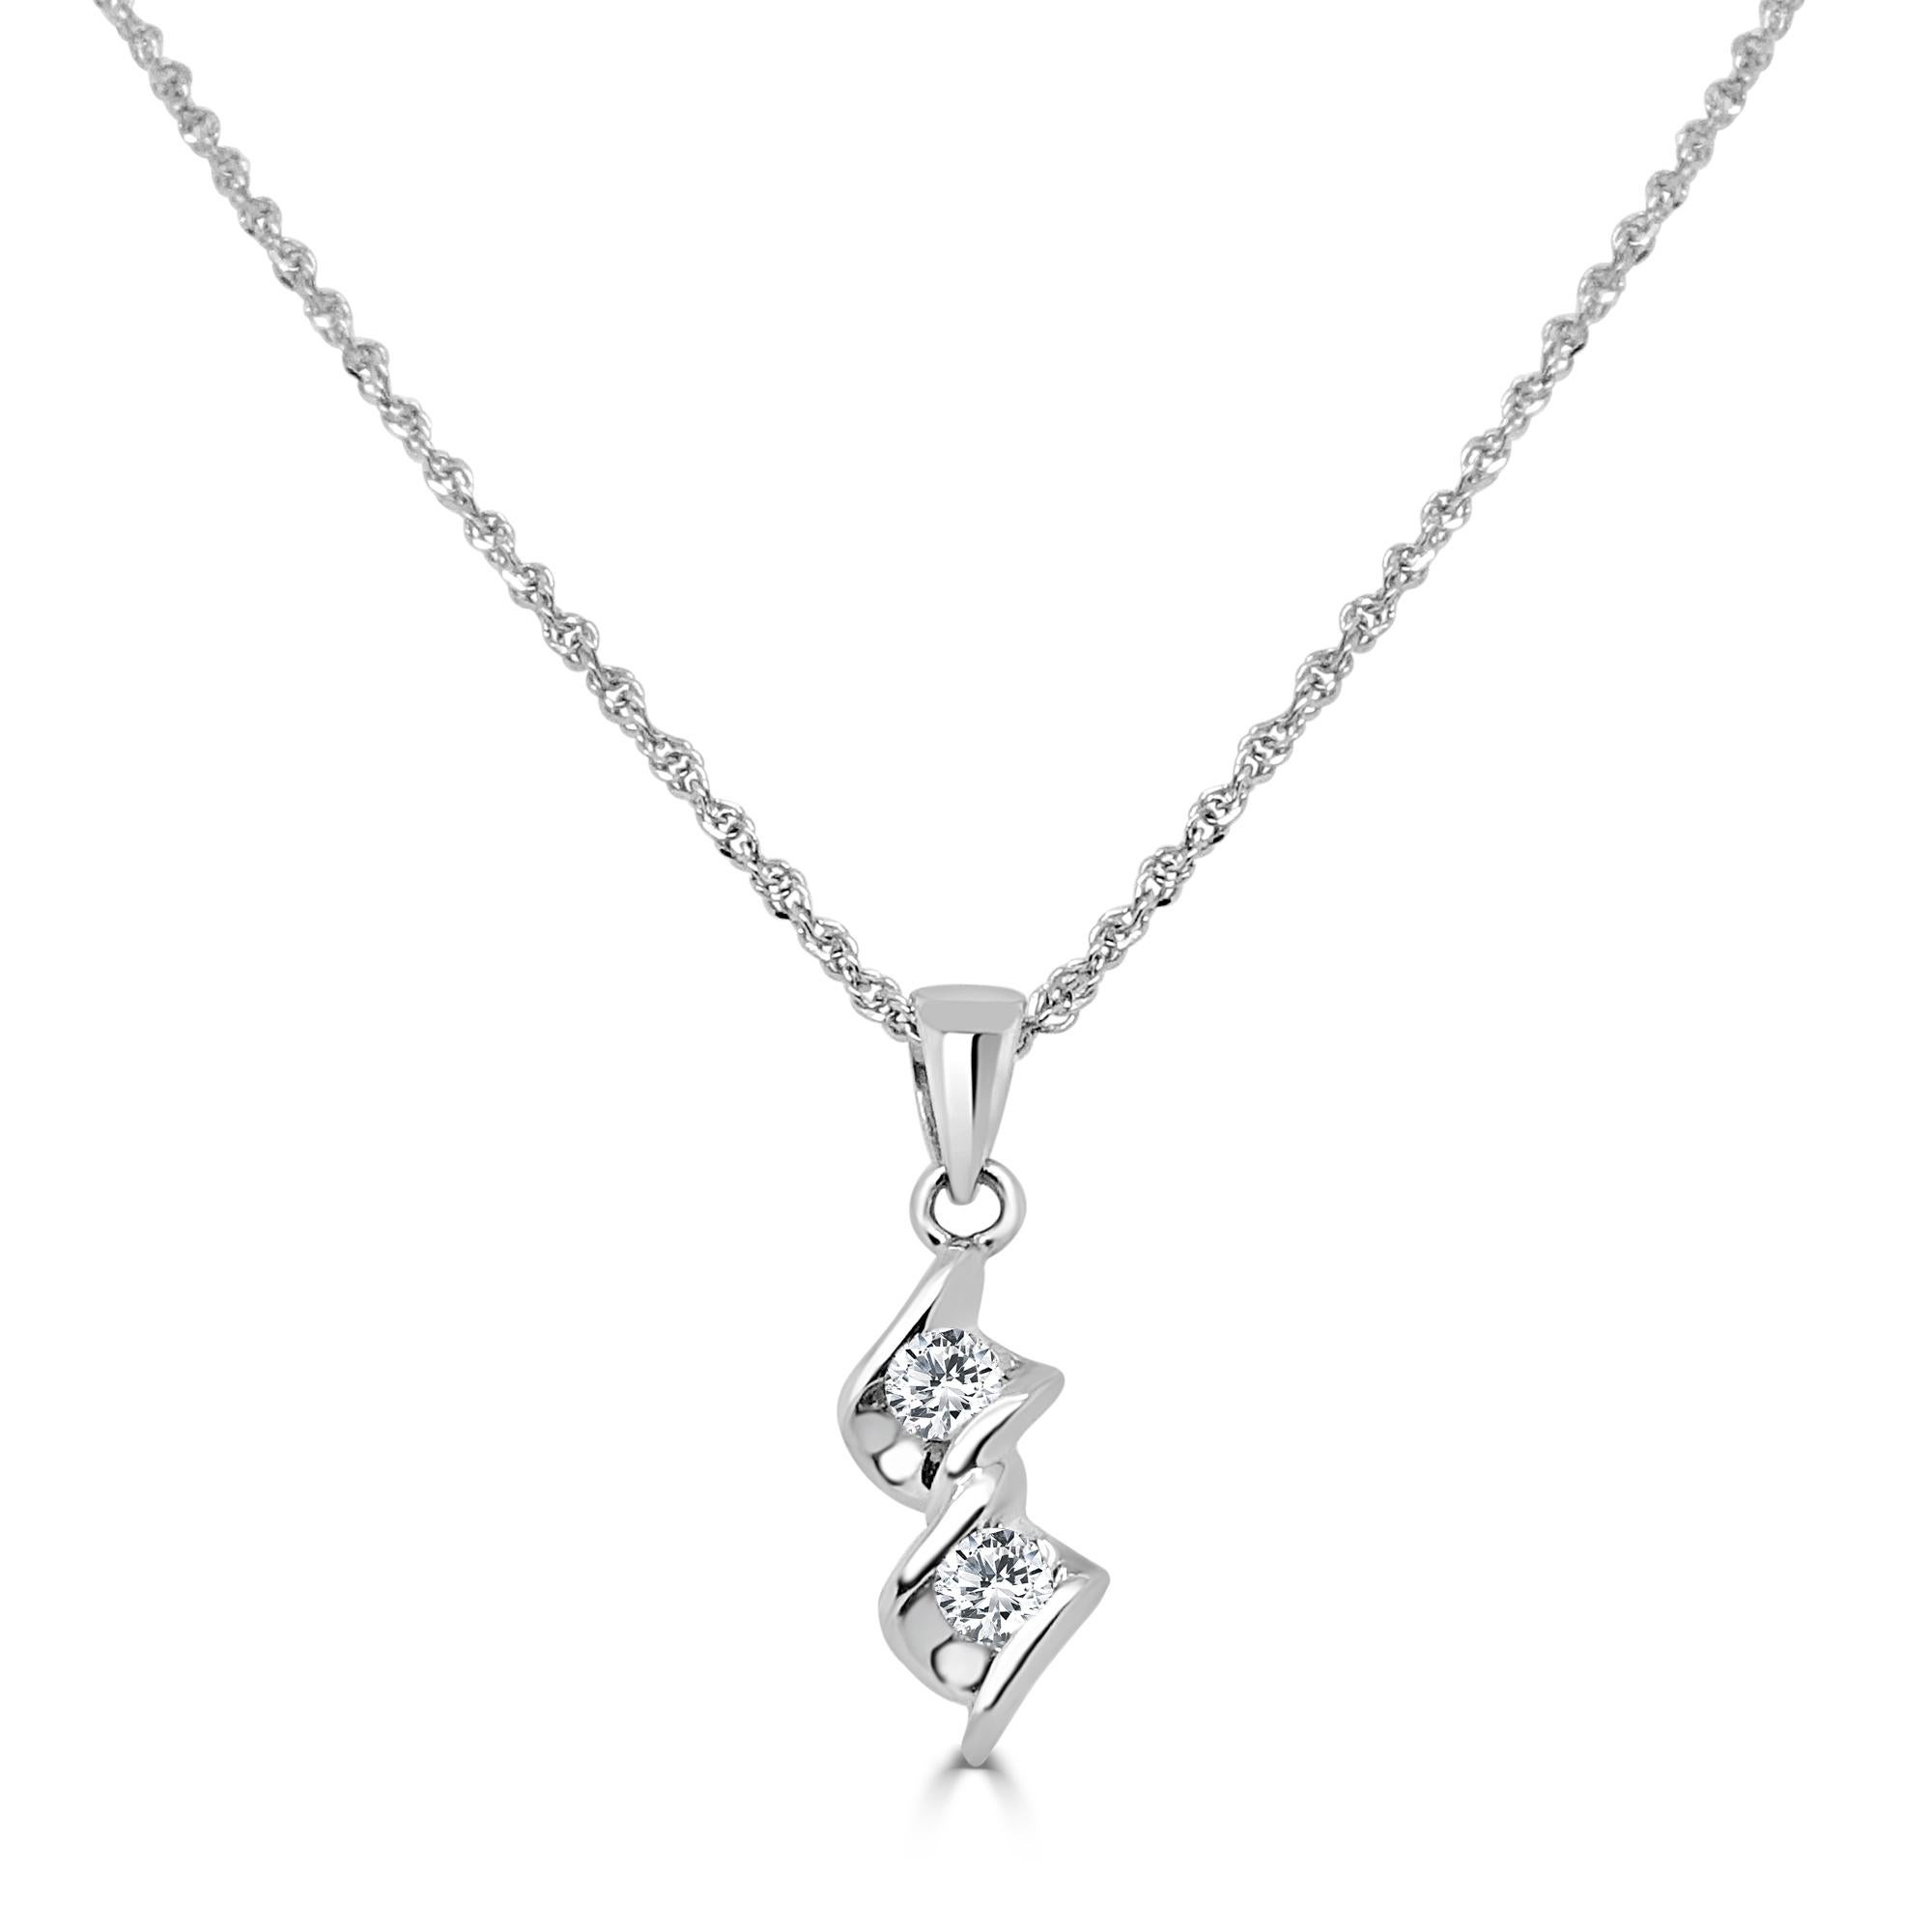 18 Karat White Gold 0.12 Carat Diamond Chain Necklace Wedding Fine Jewelry 

Gentle and elegant pendant is crafted in a sleek white gold. Featuring round cut diamonds, together totaling 0.12 TCW . Suspended from a 16-inch stunning non-tangle, non